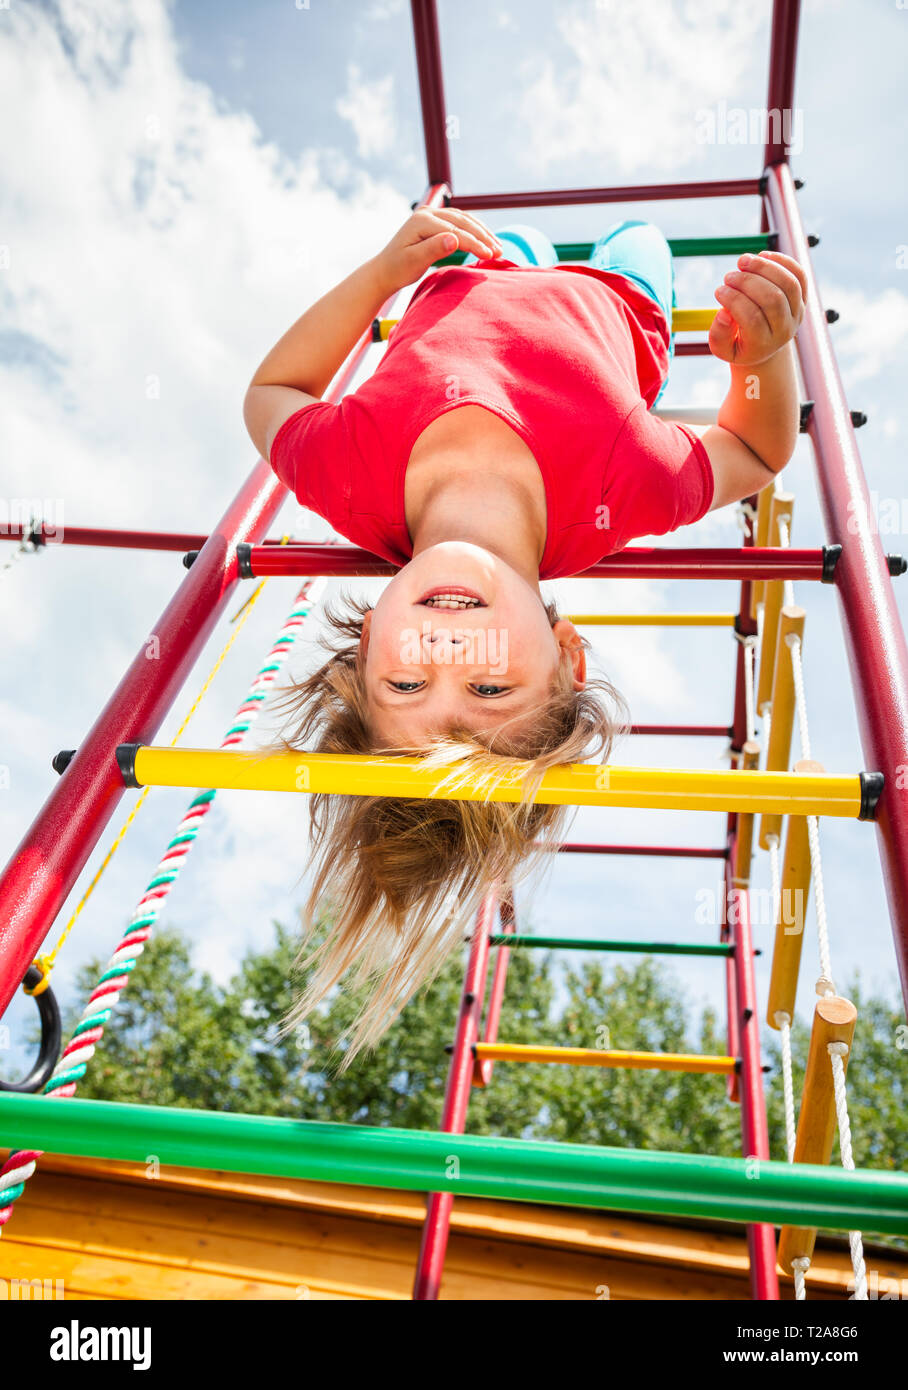 Elementary age girl hanging from a jungle gym (monkey bars or climbing frame) while playing in a playground - child safety or risky play concept Stock Photo